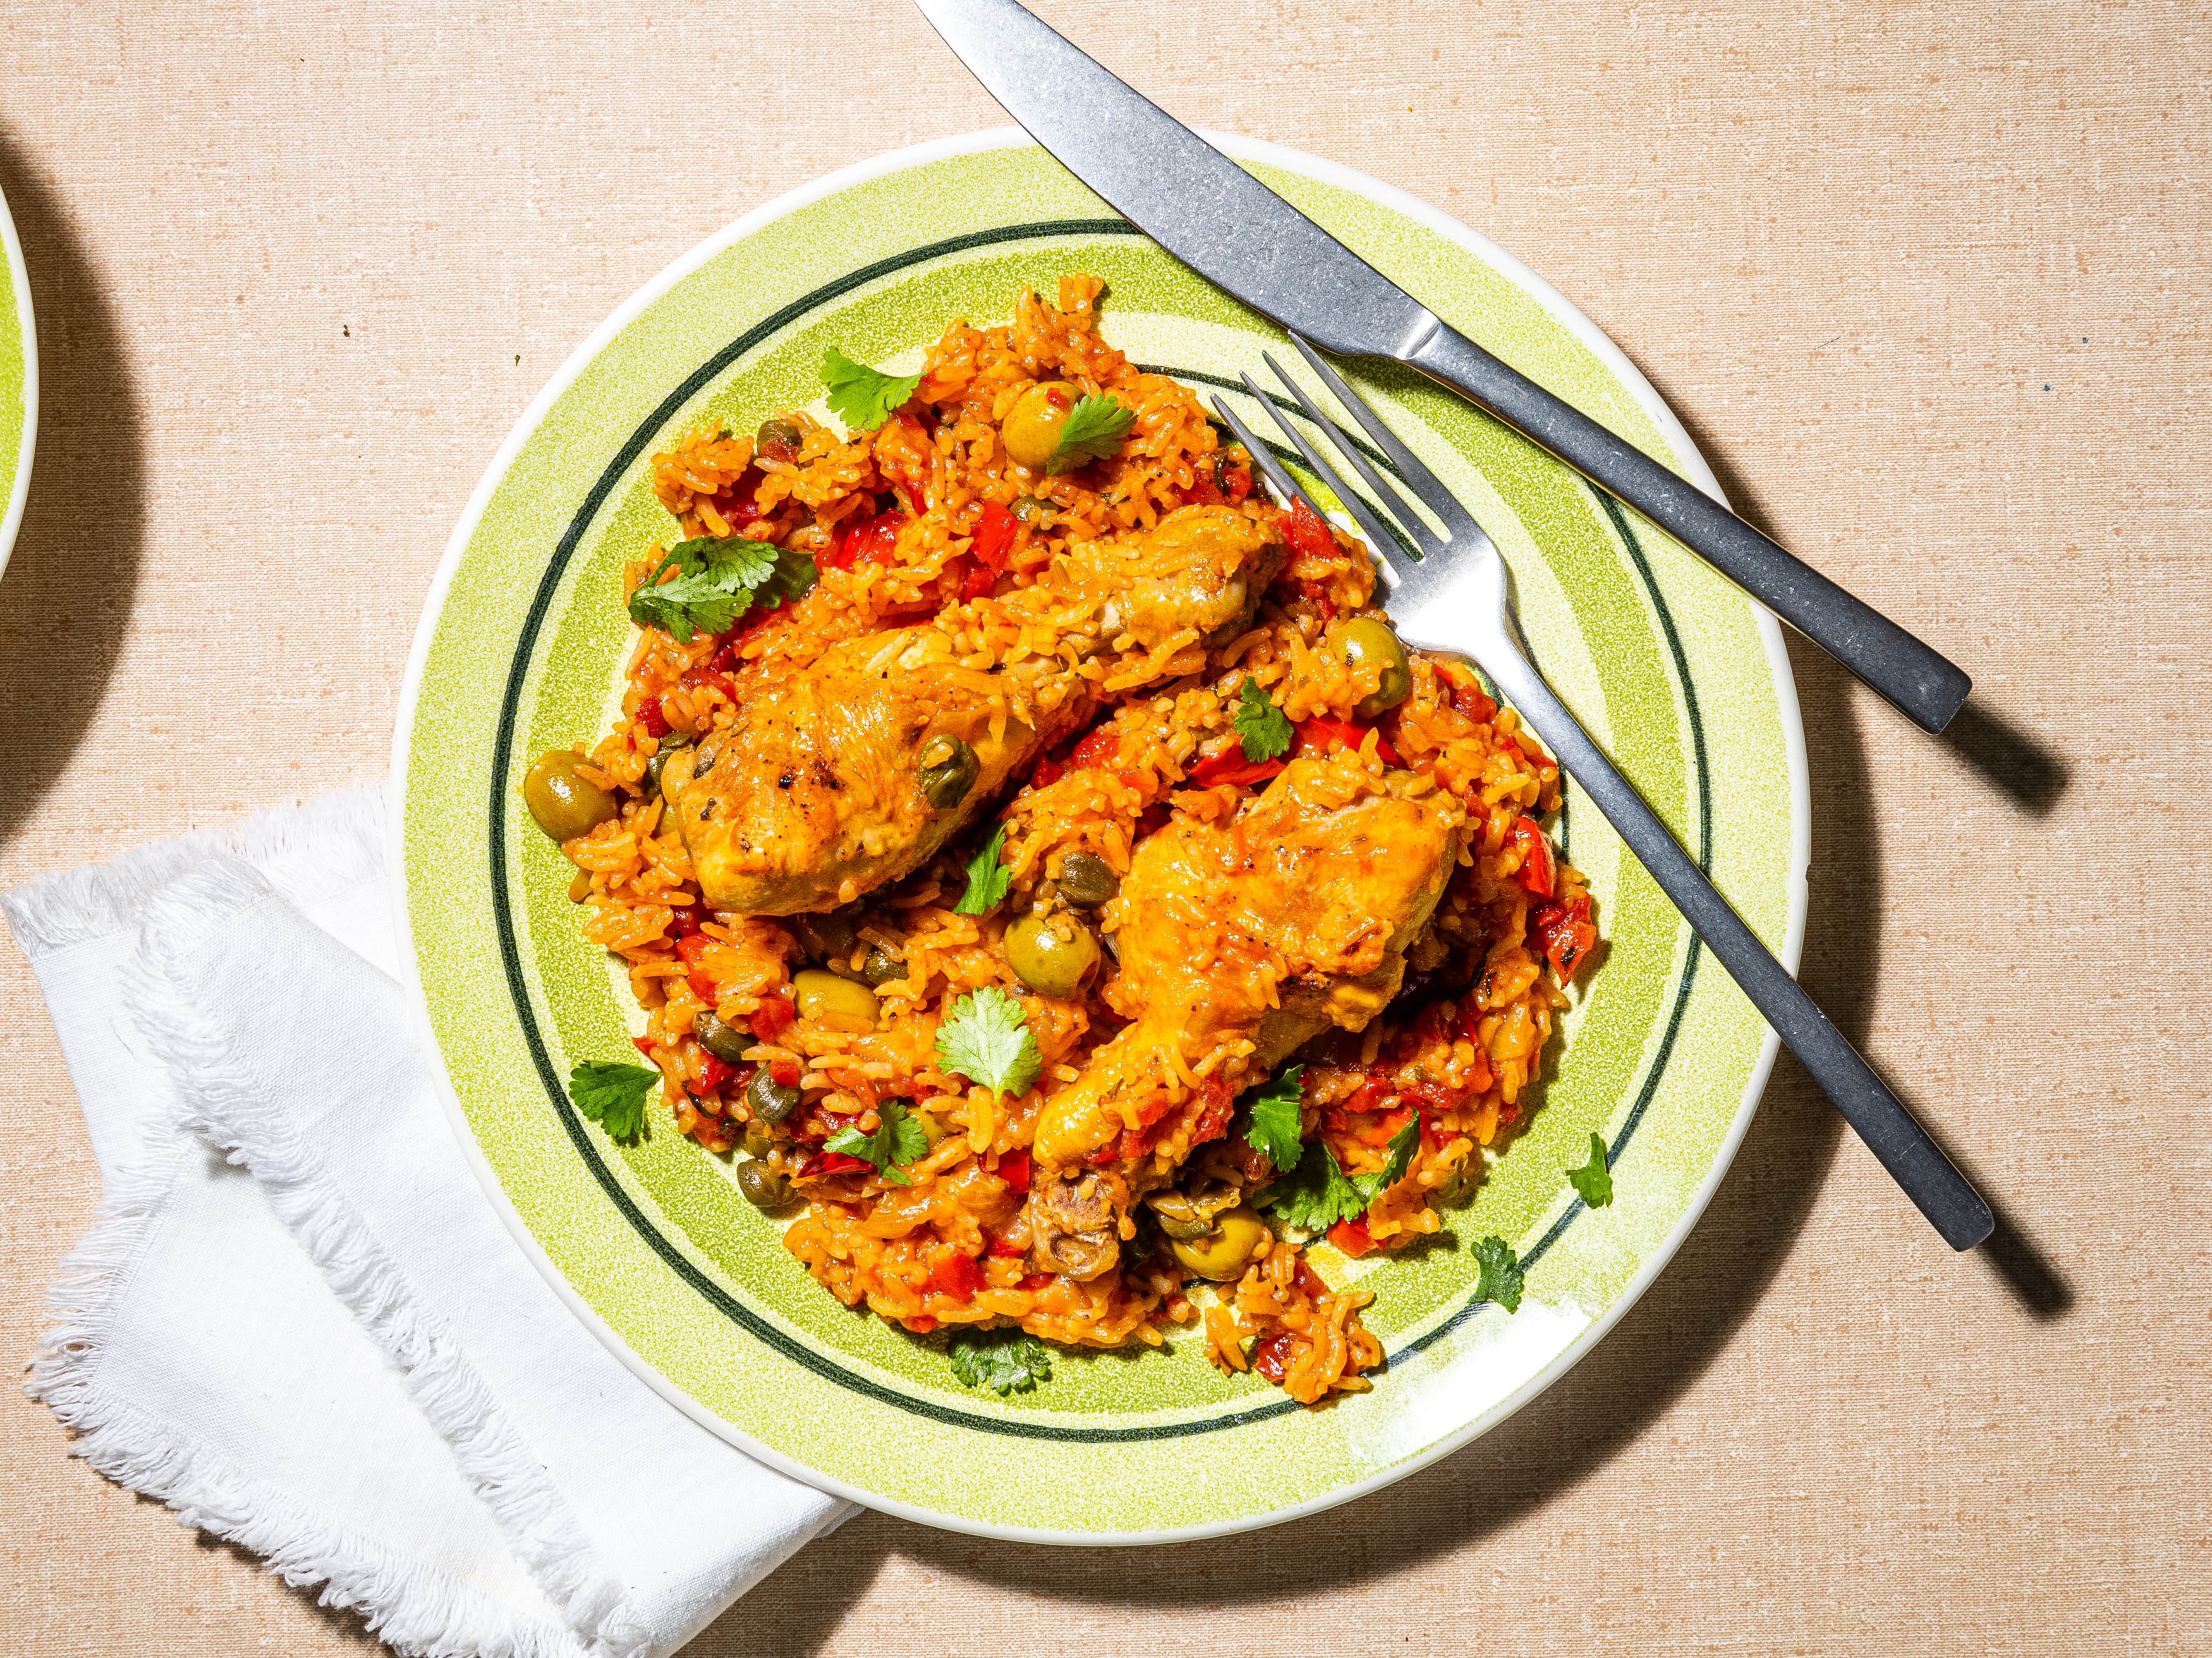 Tinted rouge with achiote oil, this arroz con pollo is a gorgeous mess of chicken, rice, coriander and olives